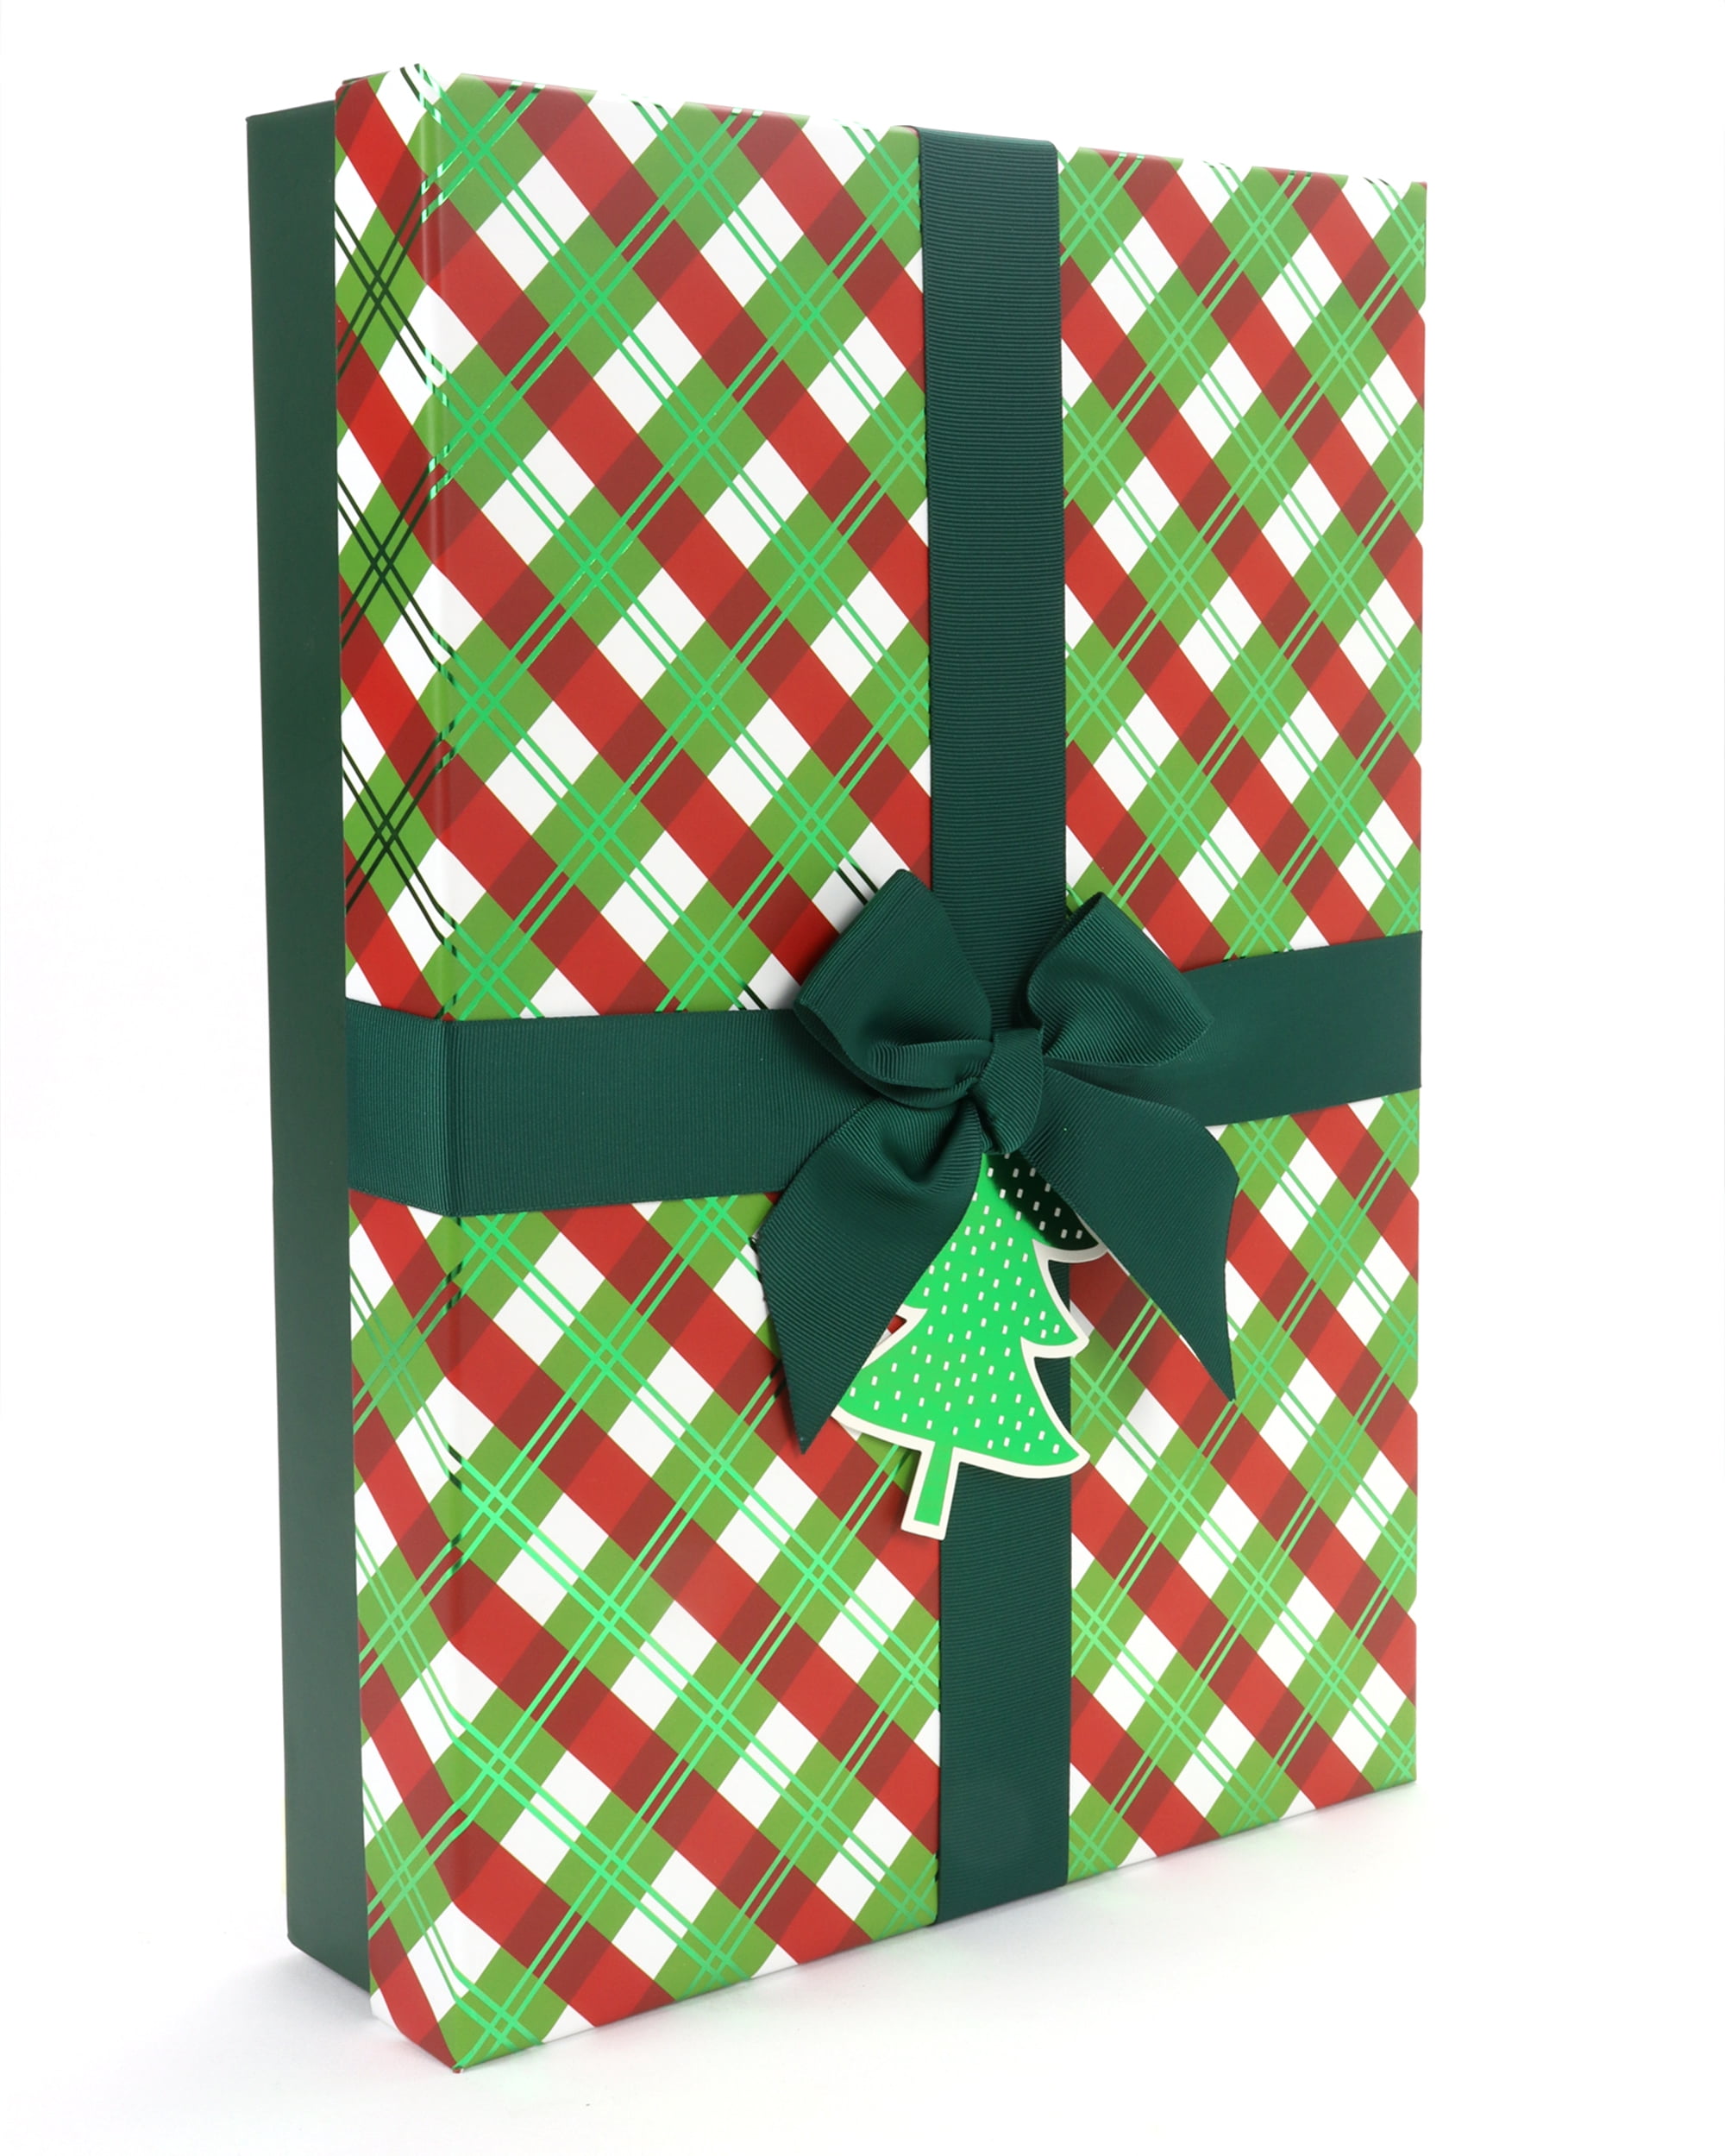 Extragoods Merry Christmas Green Gift Wrapping Paper - Set of 3 Pieces